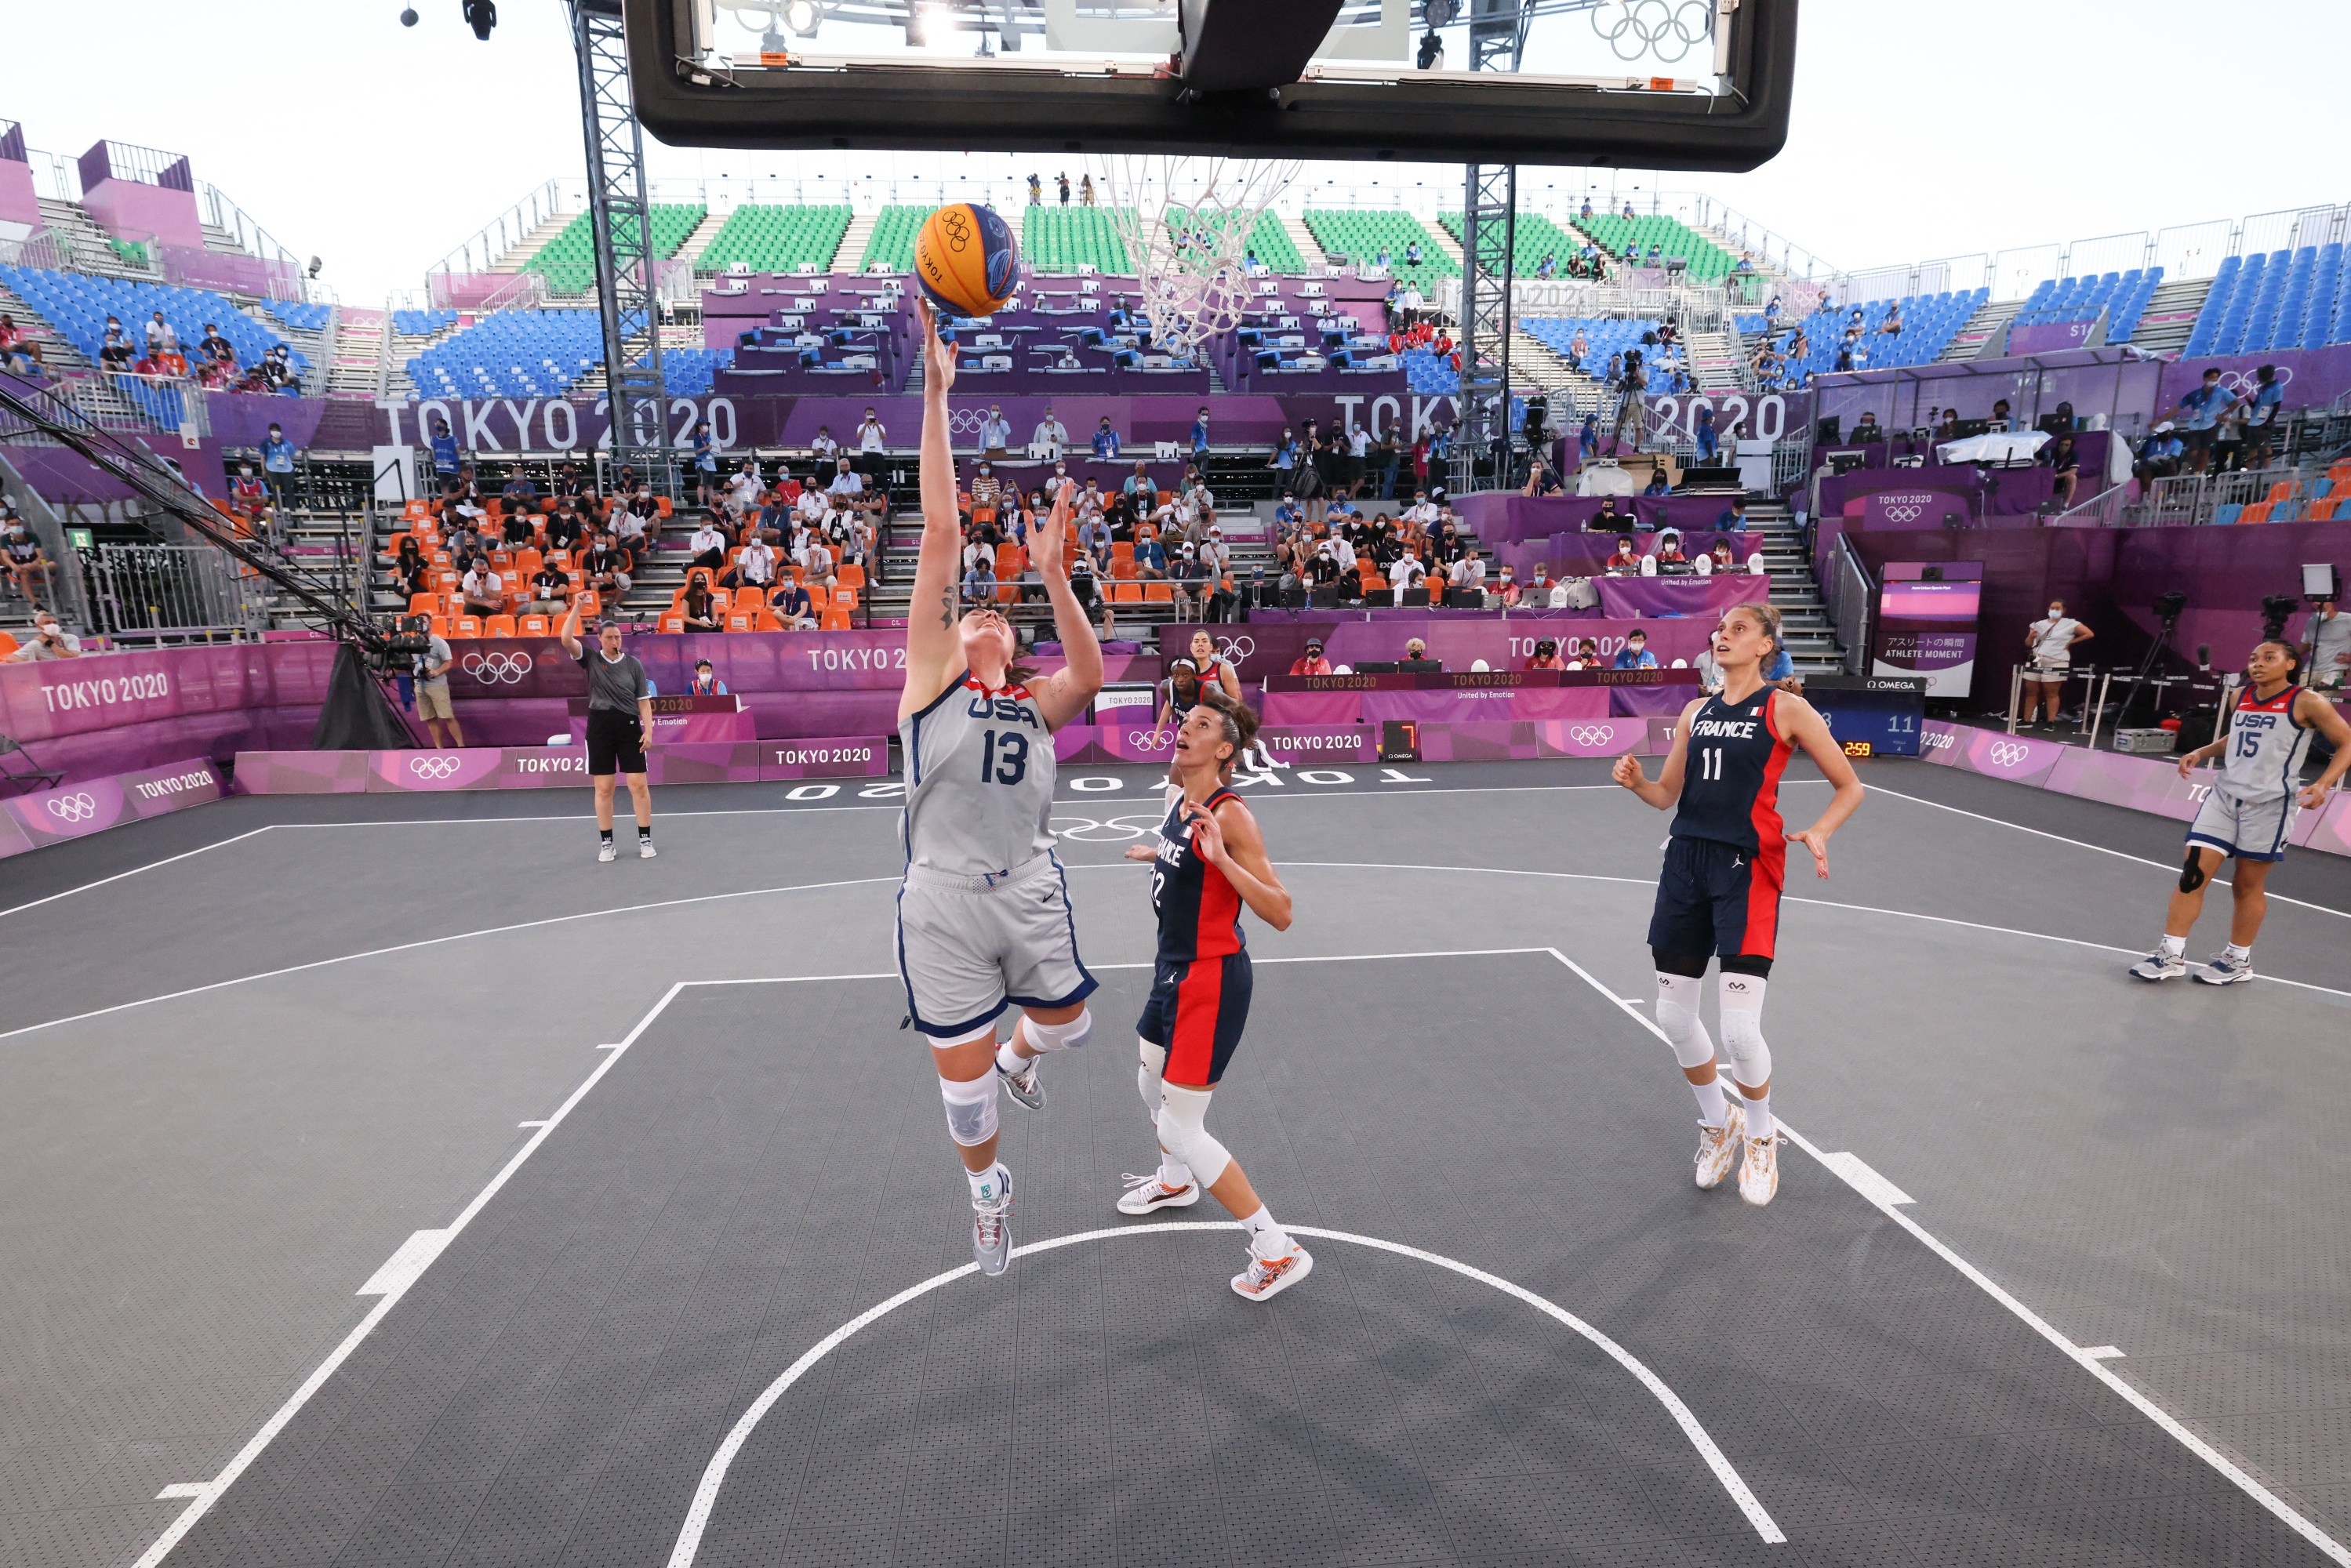 TOKYO, JAPAN - JULY 28: Stefanie Dolson #13 of the USA Women's National 3x3 Team shoots the ball during the game against France during the 2020 Tokyo Olympics during the bronze medal game on July 28, 2021 at Aomi Urban Sports Park in Tokyo, Japan. NOTE TO USER: User expressly acknowledges and agrees that, by downloading and or using this photograph, User is consenting to the terms and conditions of the Getty Images License Agreement.   Stephen Gosling/NBAE via Getty Images/AFP (Photo by Stephen Gosling / NBAE / Getty Images / Getty Images via AFP)